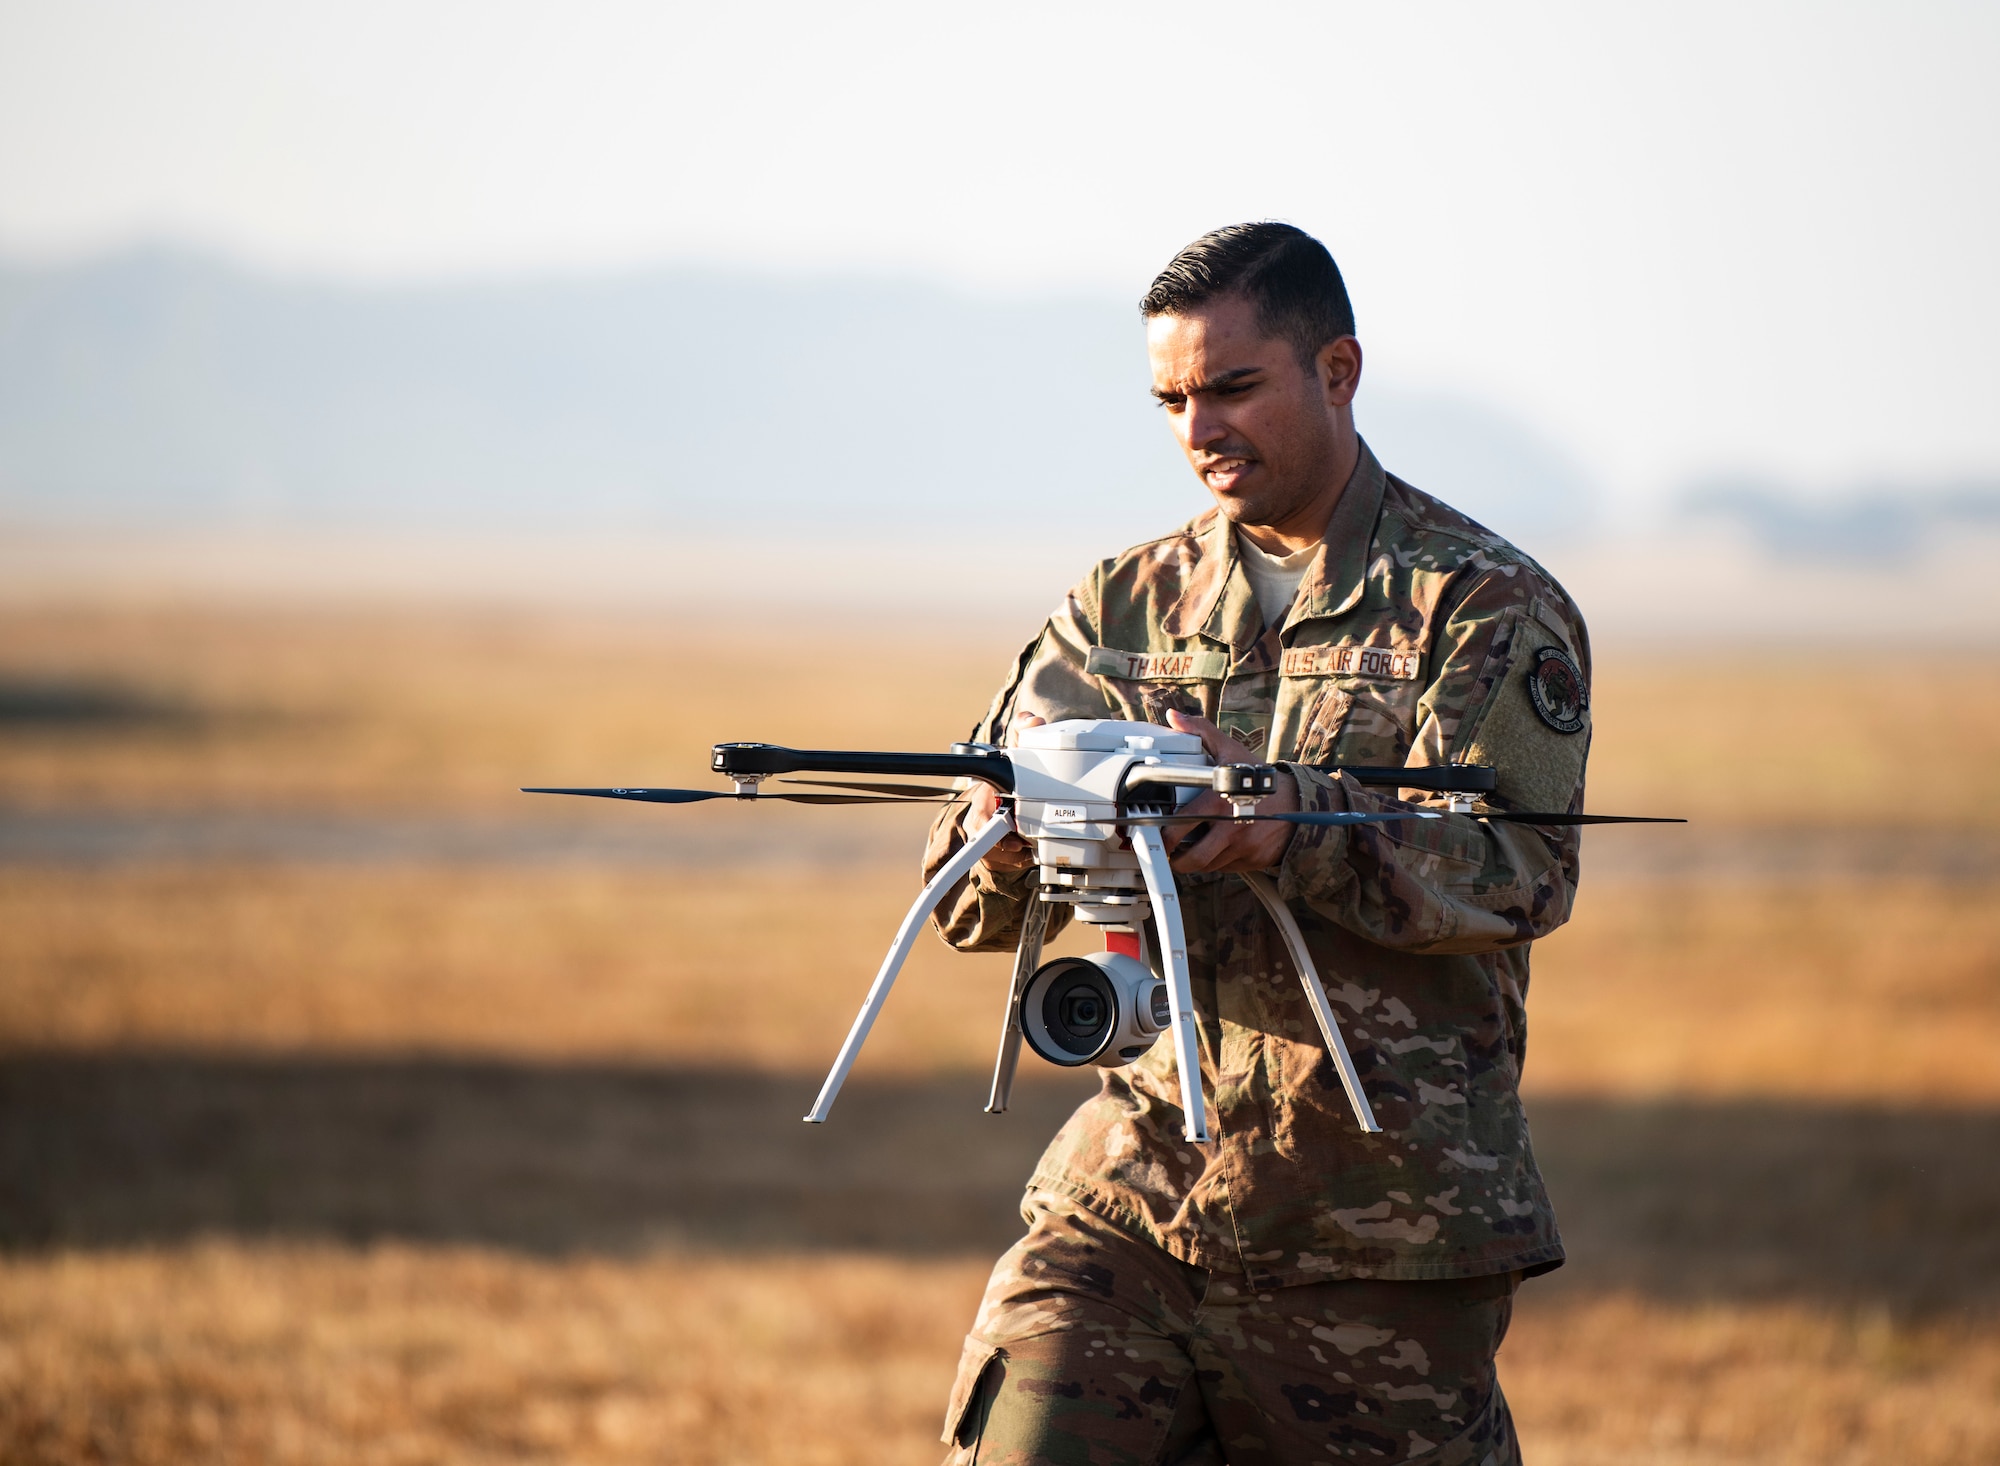 U.S. Air Force Staff Sgt. Nishantkumar Thakar, 8th Civil Engineer Squadron engineering technician, carries a quadcopter at Kunsan Air Base, Republic of Korea, Nov. 2, 2018. The 8th CES is piloting a Rapid Airfield Damage Assessment System program to streamline surveying airfield damage instead of sending personnel into potentially hazardous environments. (U.S. Air Force photo by Senior Airman Stefan Alvarez)